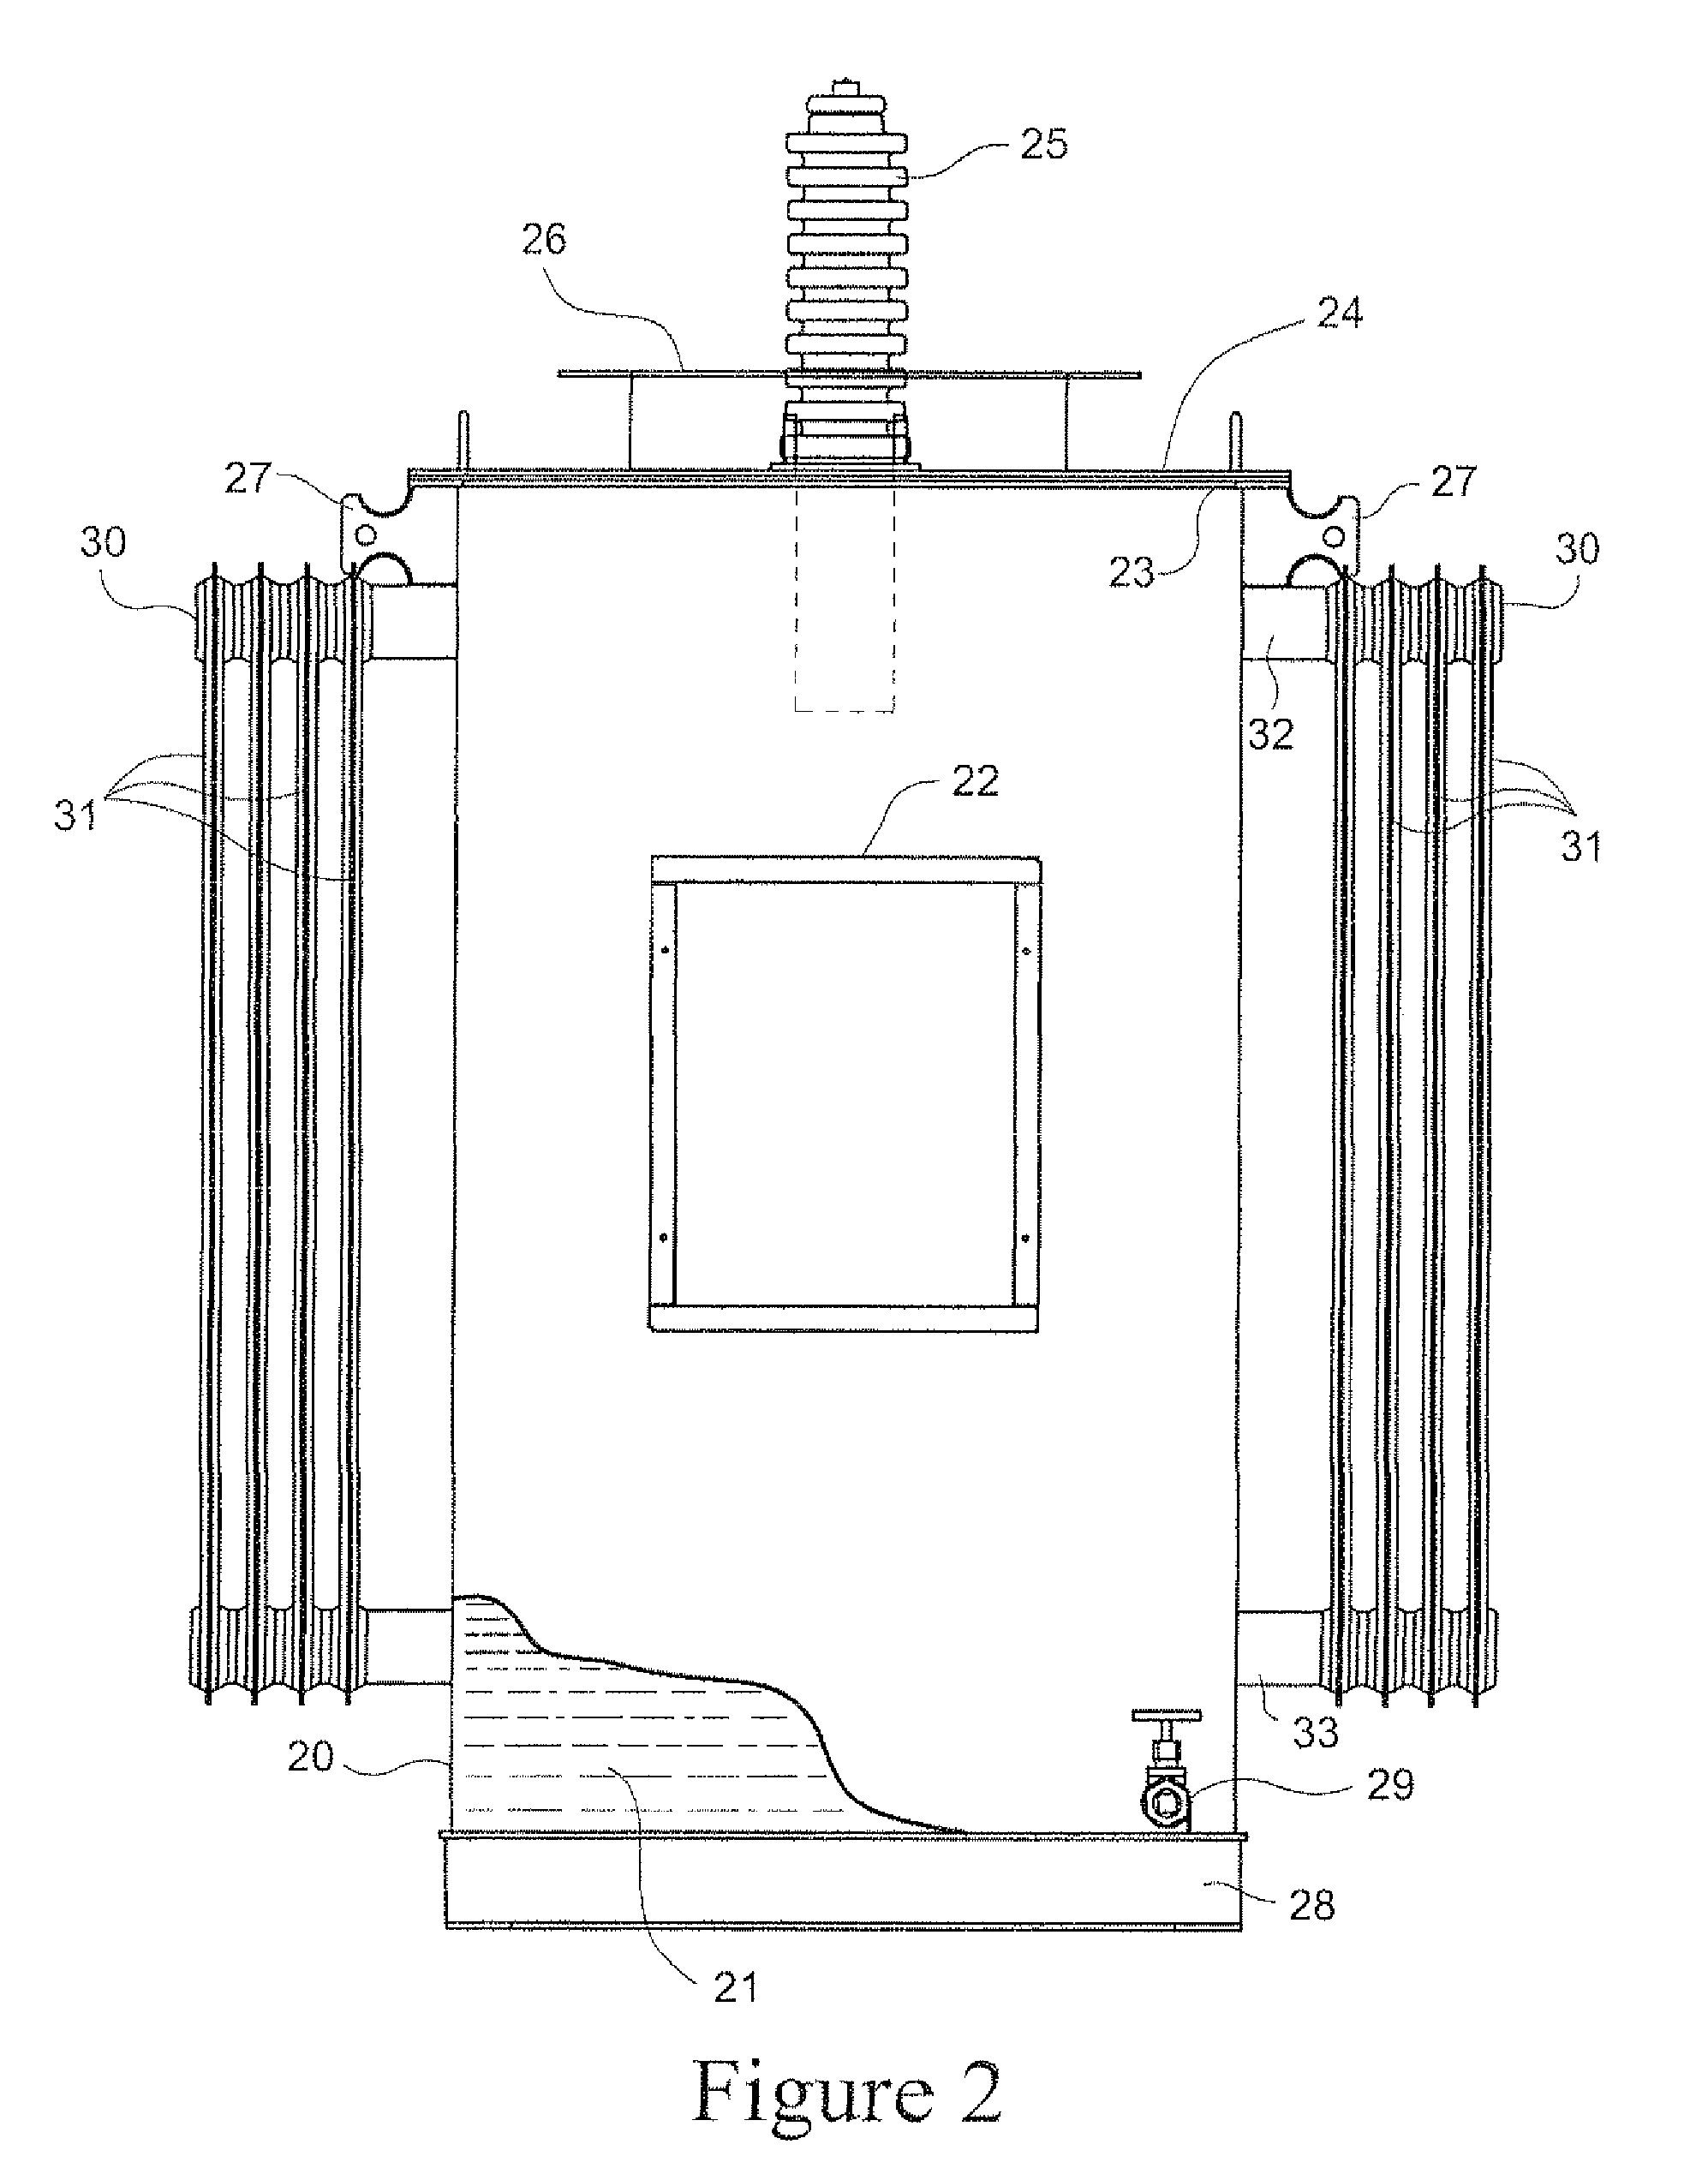 Apparatus and arrangement for housing voltage conditioning and filtering circuitry components for an electrostatic precipitator